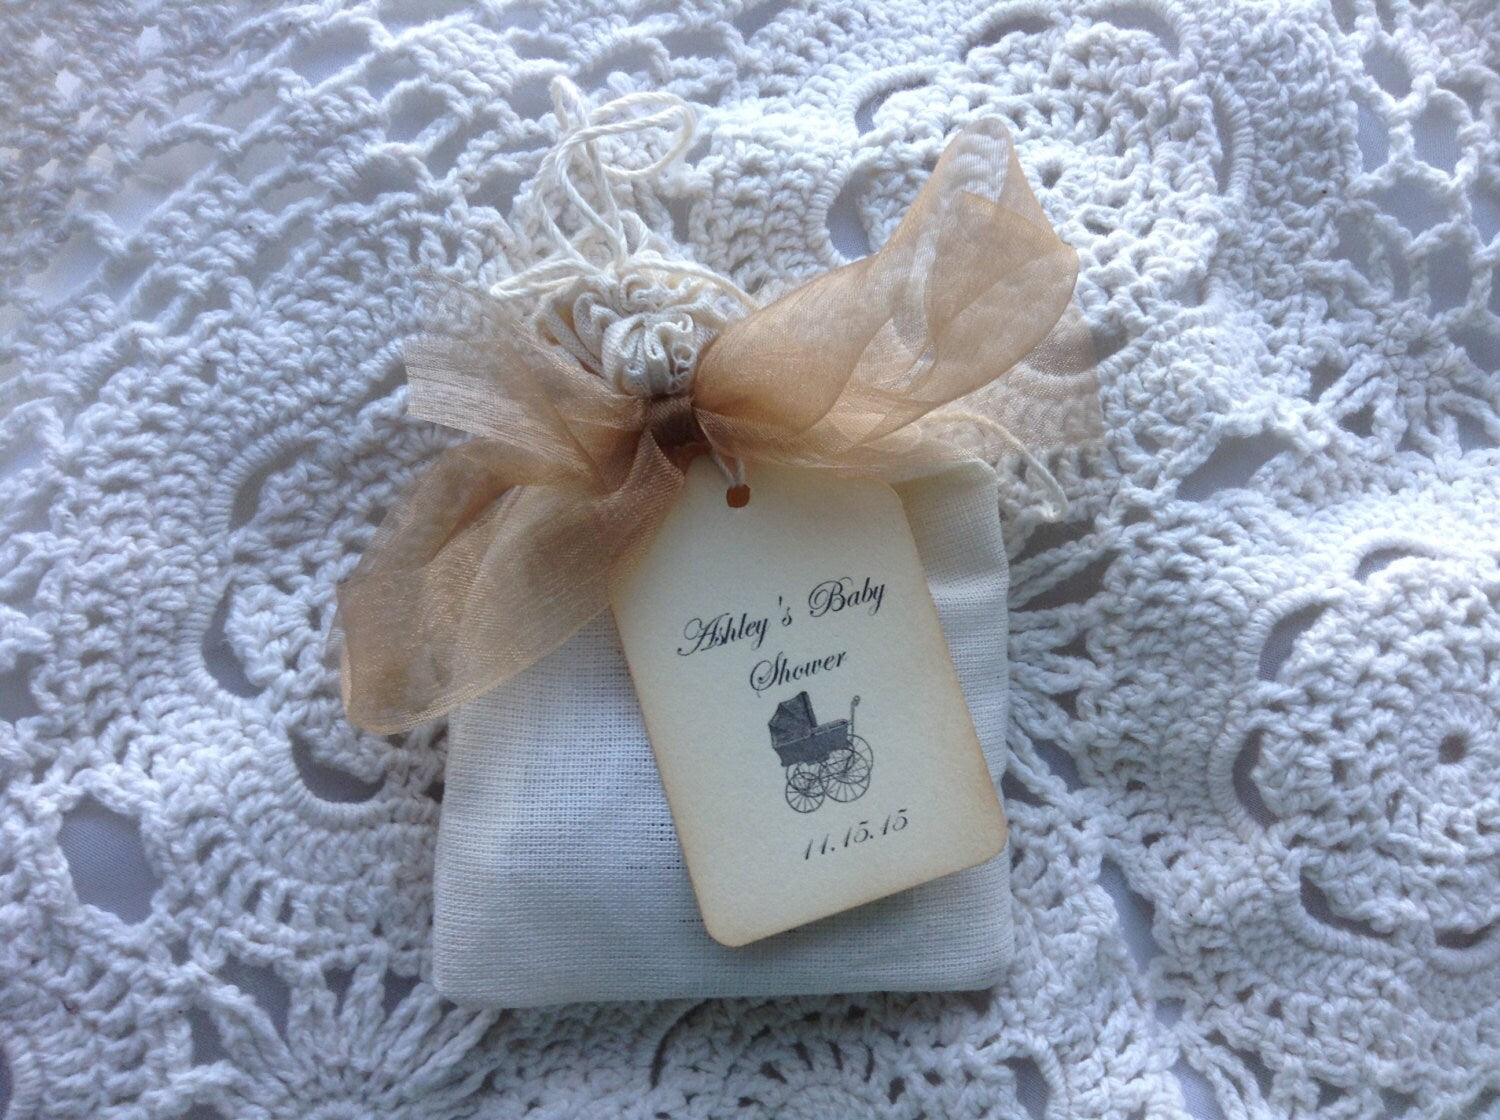 Tea Party Favor-Two Organic Teas in a Muslin Bag with Ribbons-Wedding-Bridal Shower-Baby Shower-Belle Savon Vermont